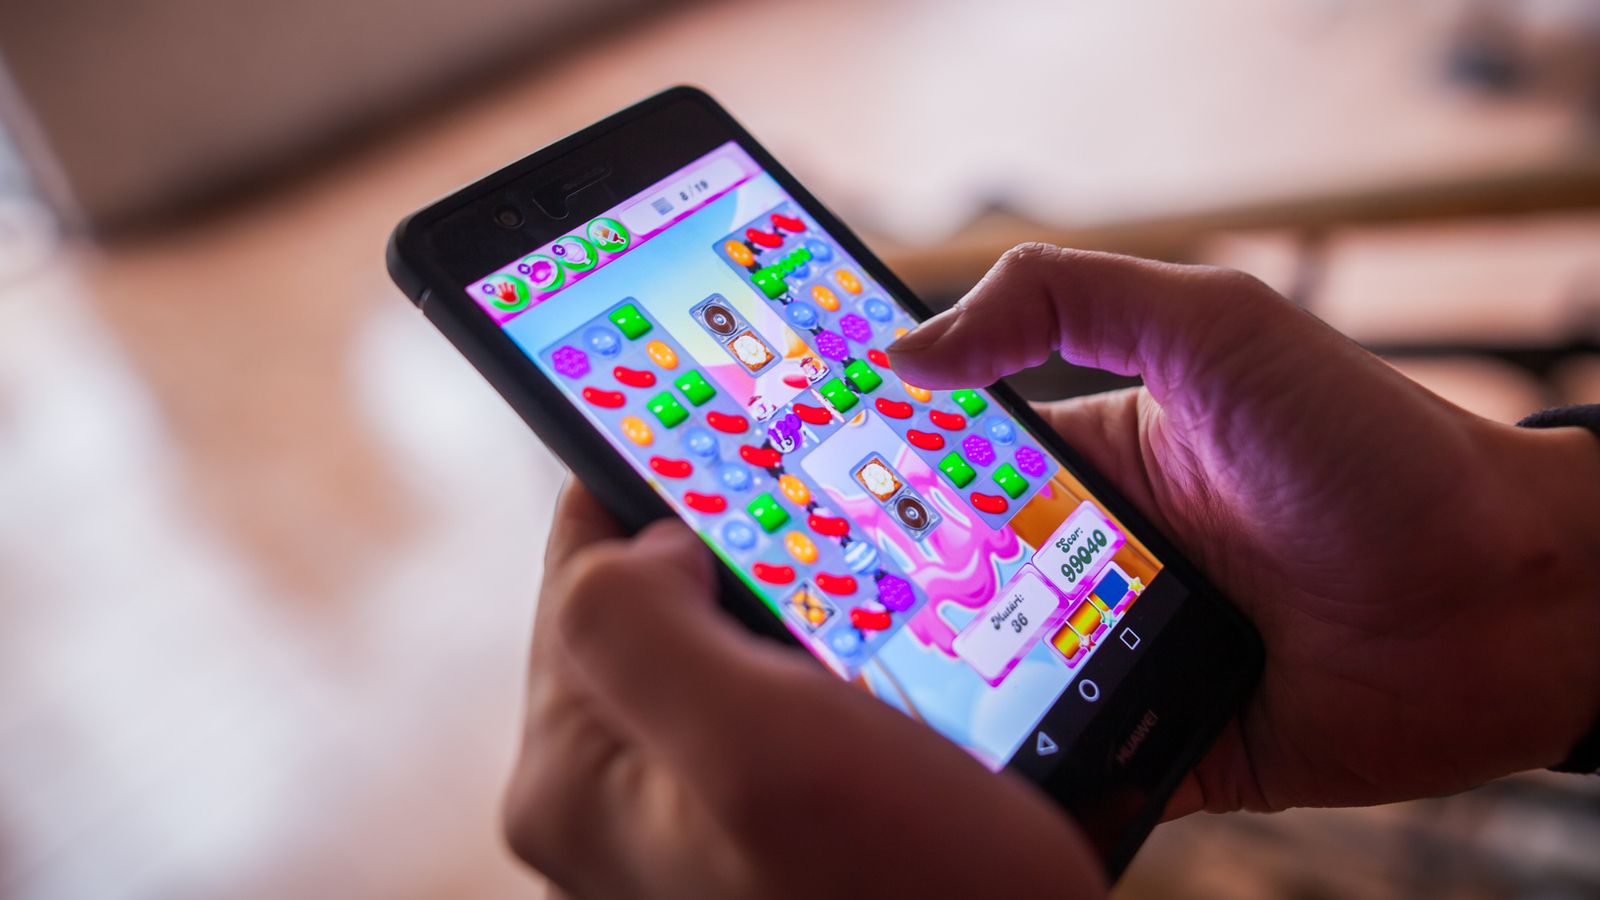 Candy Crush tech guru on how ‘really exciting’ AI is supercharging work on one of world’s most popular games | Science & Tech News